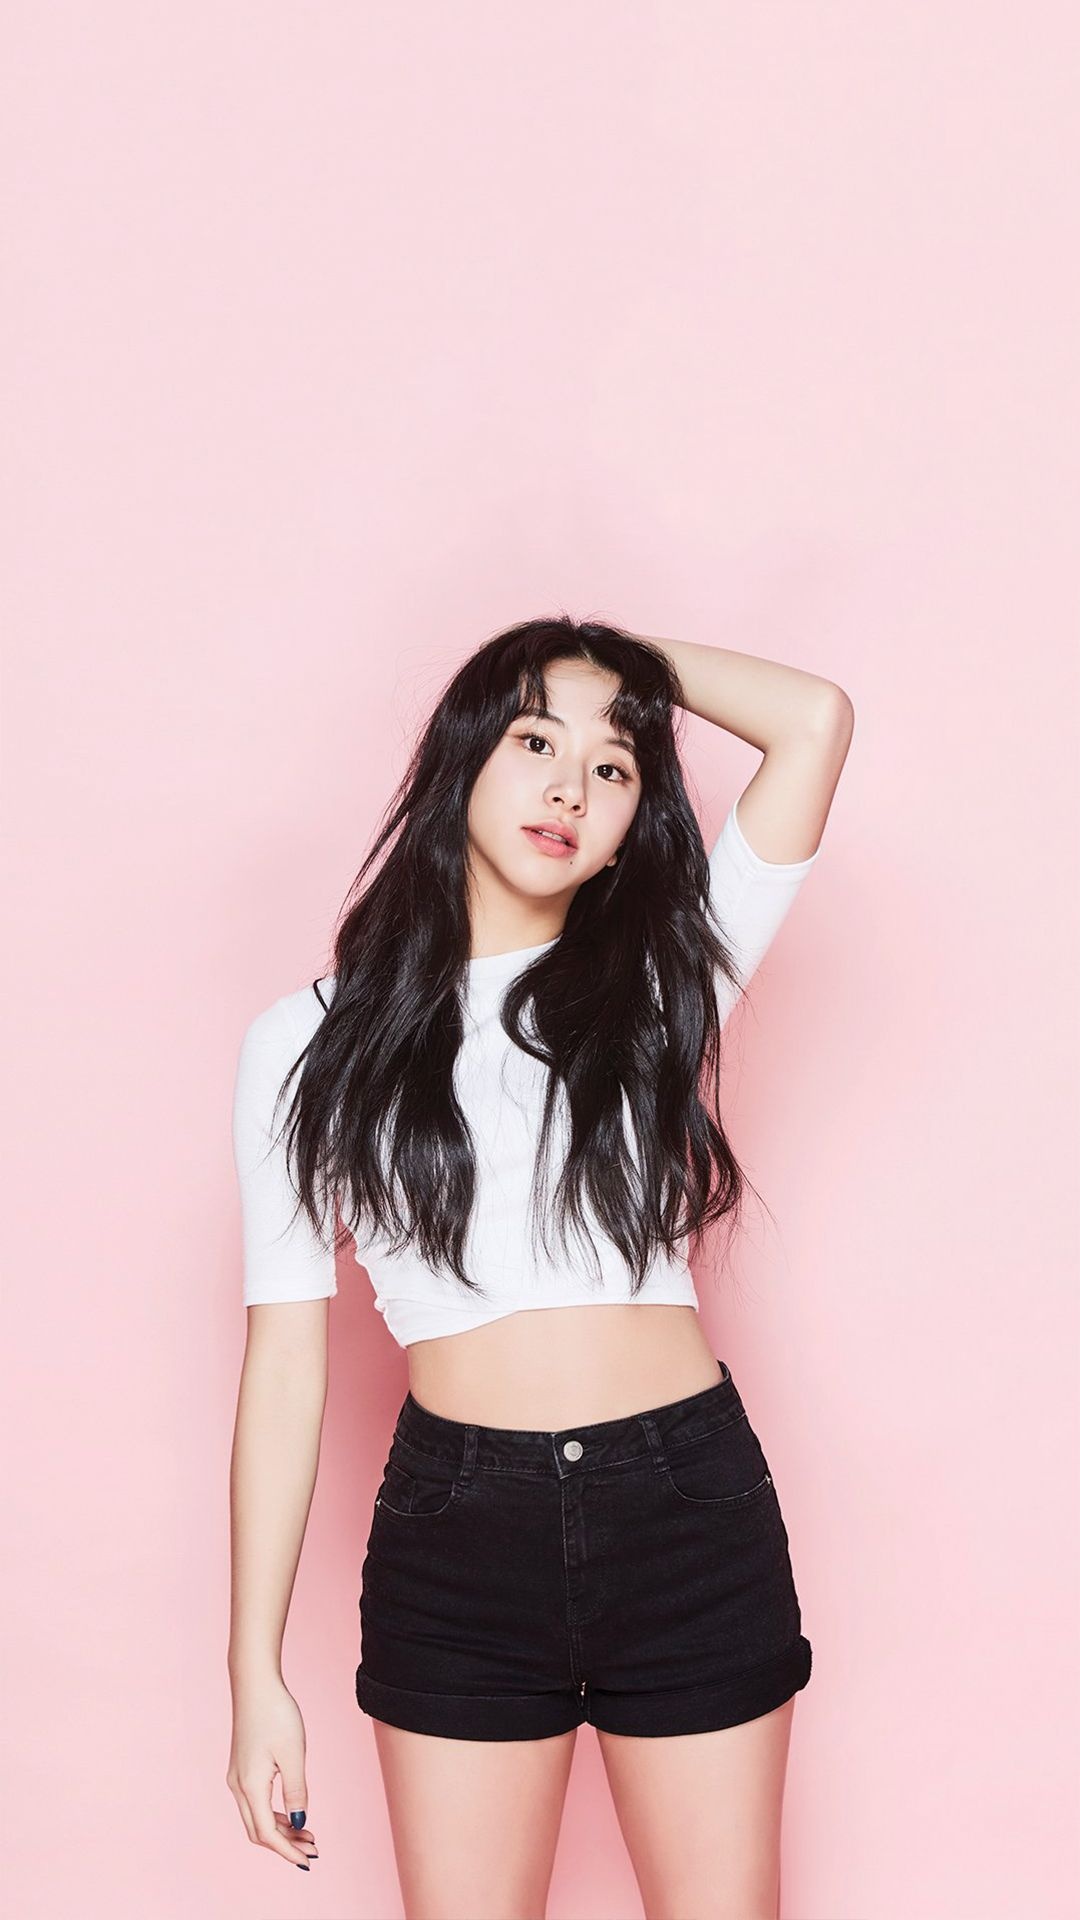 Chaeyoung in TWICE, Son Chaeyoung wallpapers, TWICE backgrounds, Kpop idol, 1080x1920 Full HD Handy